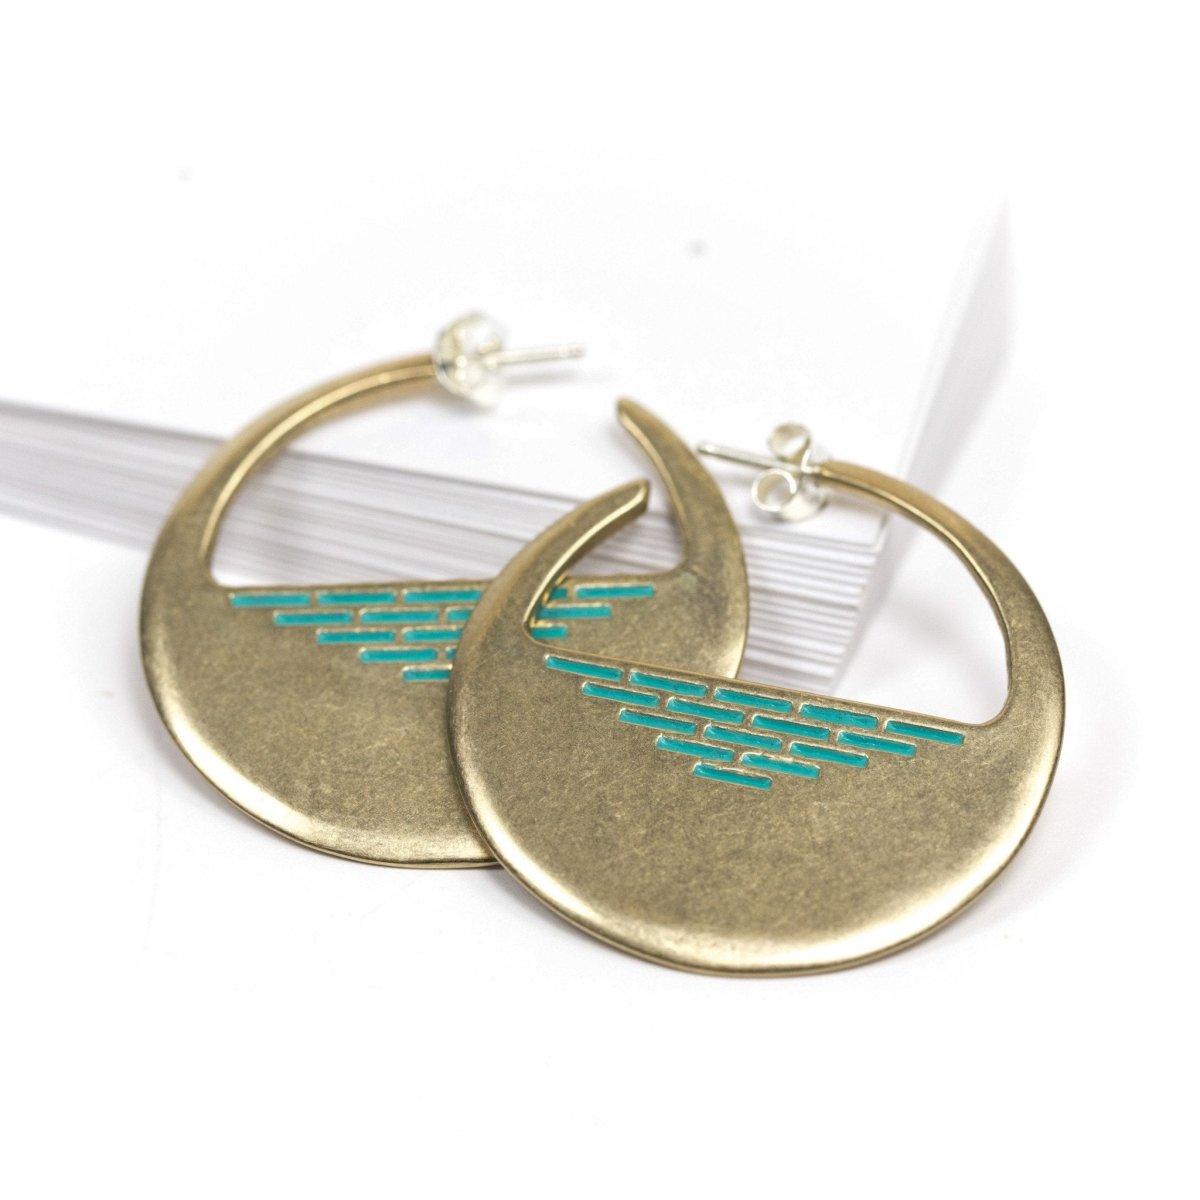 A pair of cast-bronze disc hoop earrings, decorated with a pyramid of geometric, aqua paint detail through the center of the disc, and finished with sterling silver posts and butterfly backings. Hand-crafted in Portland, Oregon. 